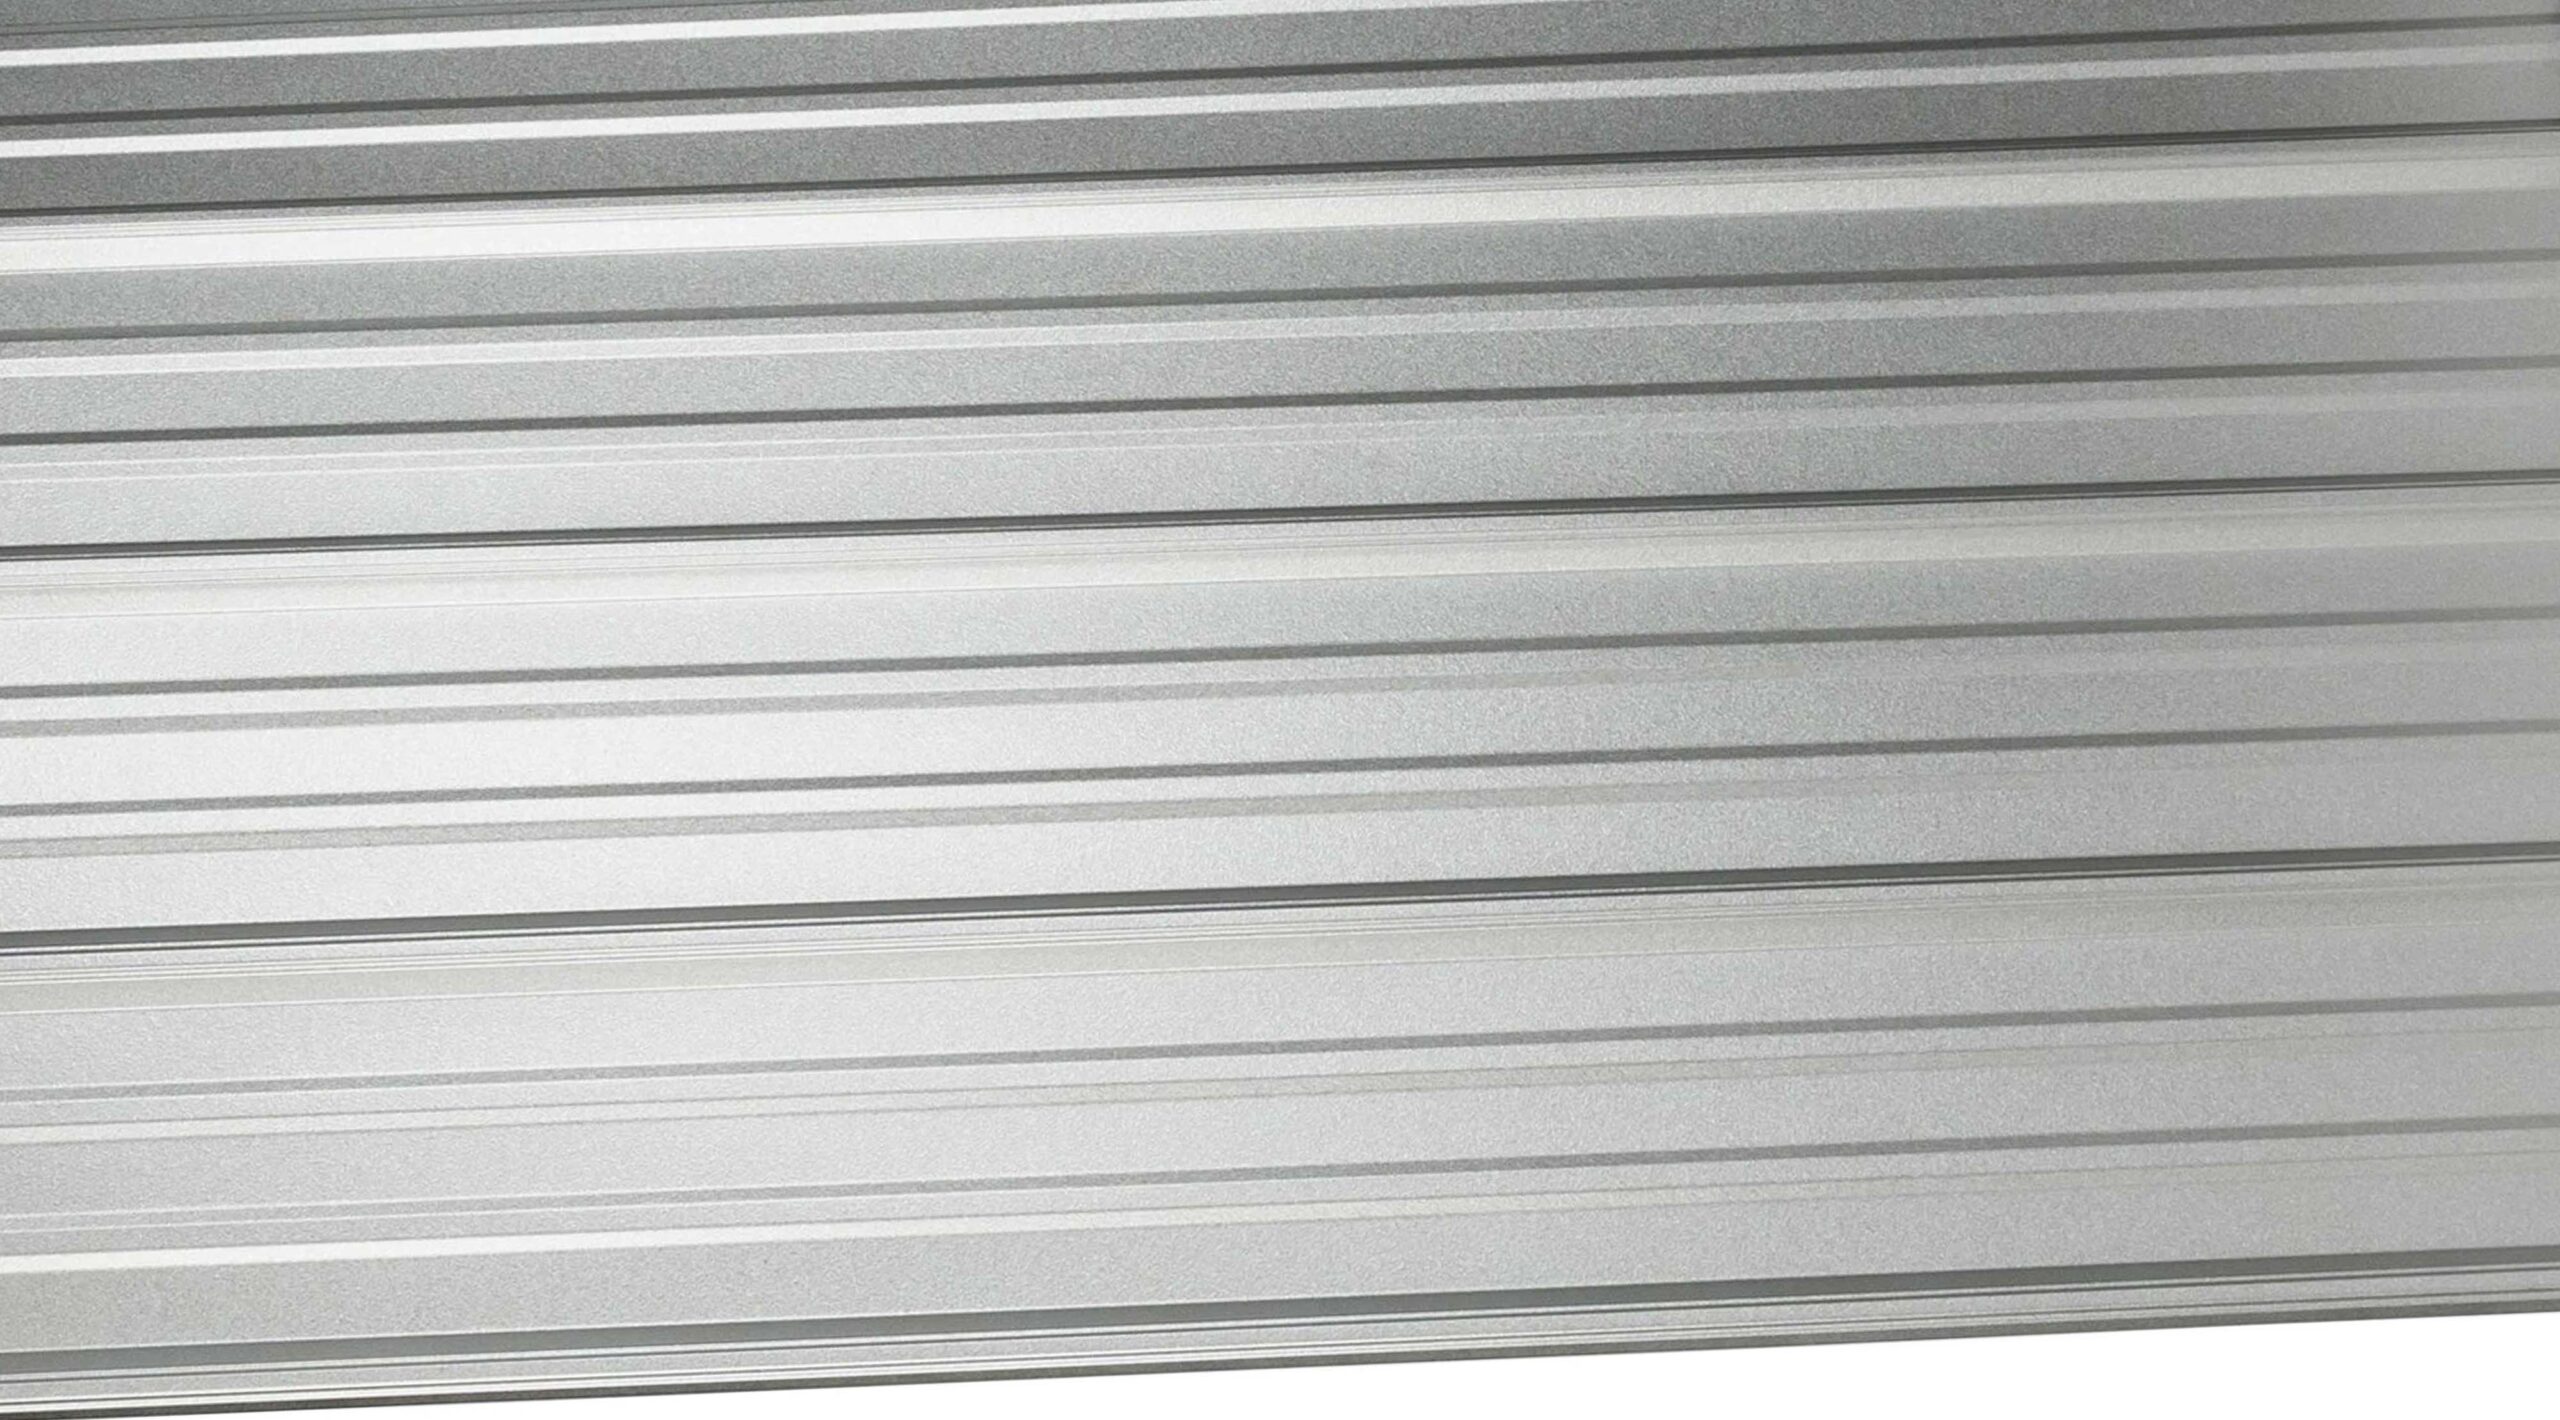 Example of bare or acrylic coated galvalume metal offered by Heartland Metal and Building Supplies in Marion, Illinois